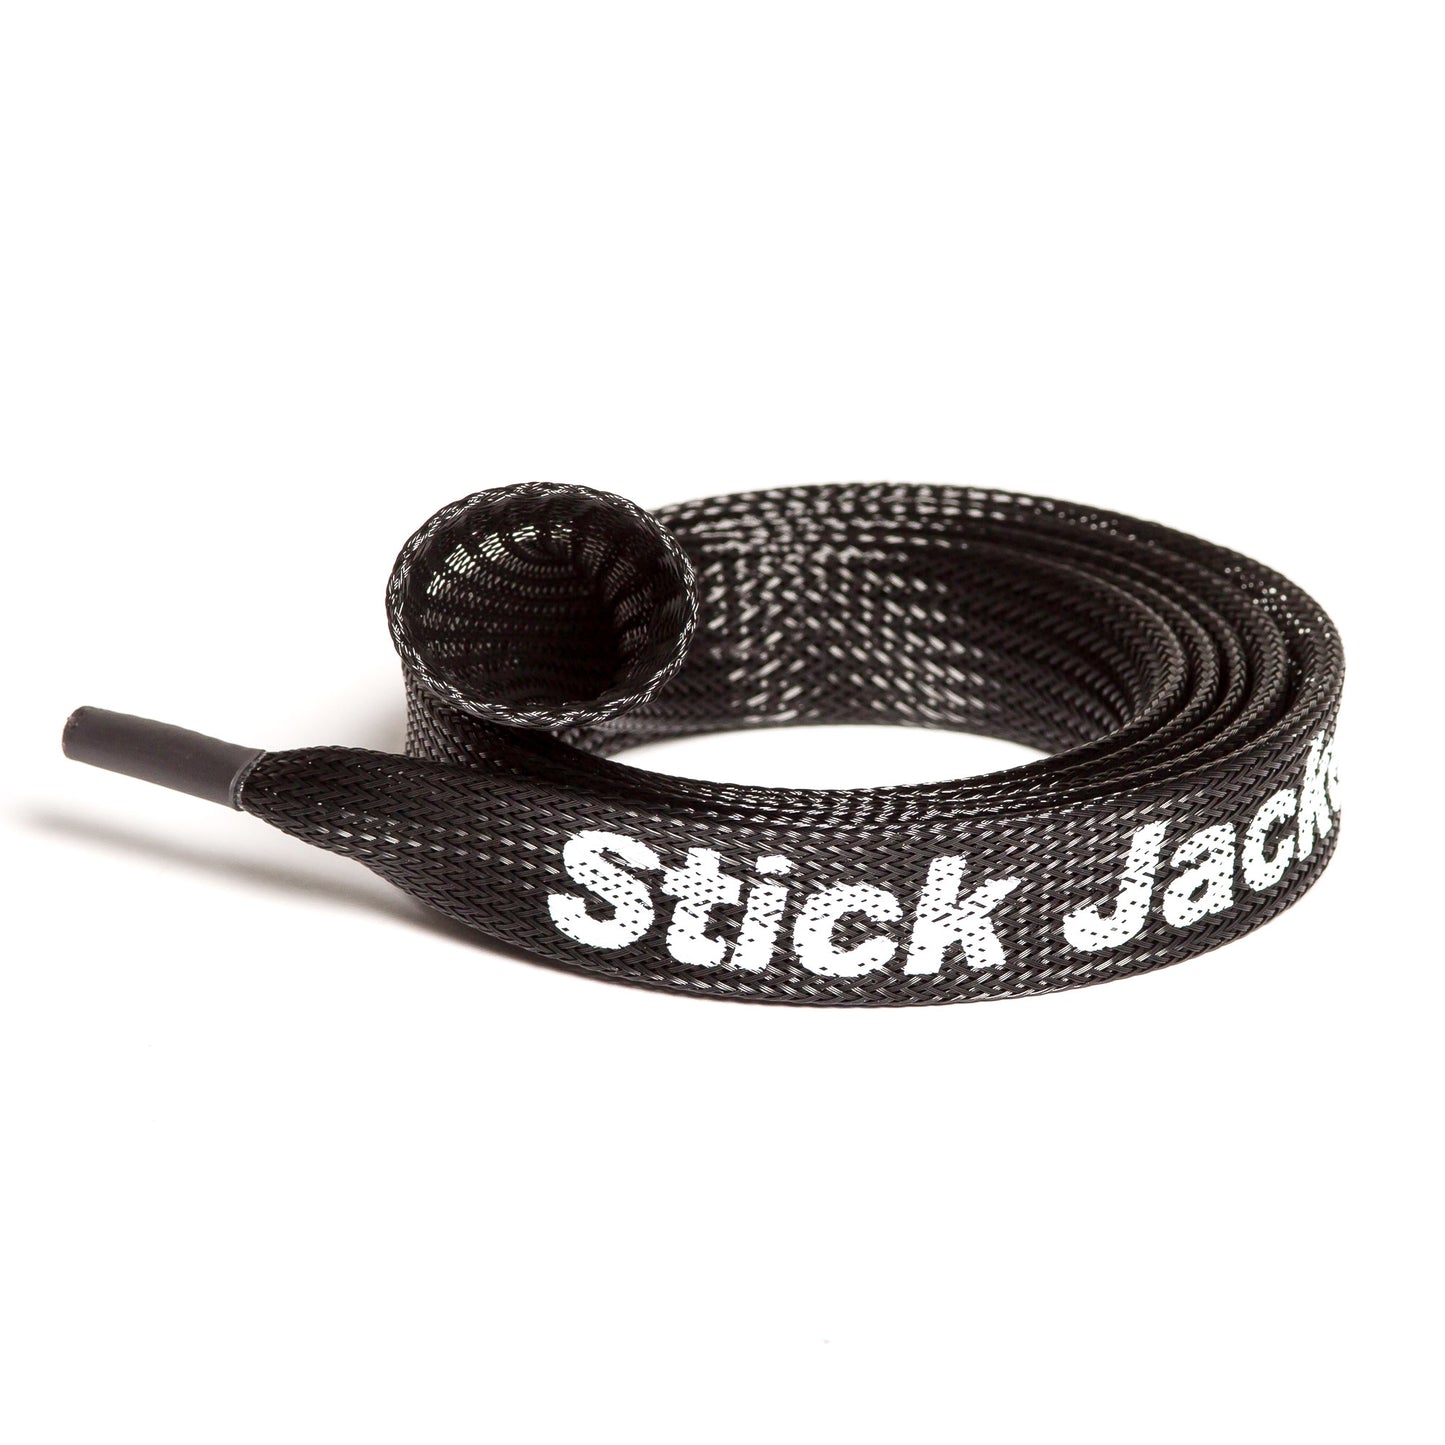 Black Casting Stick Jacket® Fishing Rod Cover For Rods up to 7-1/2'